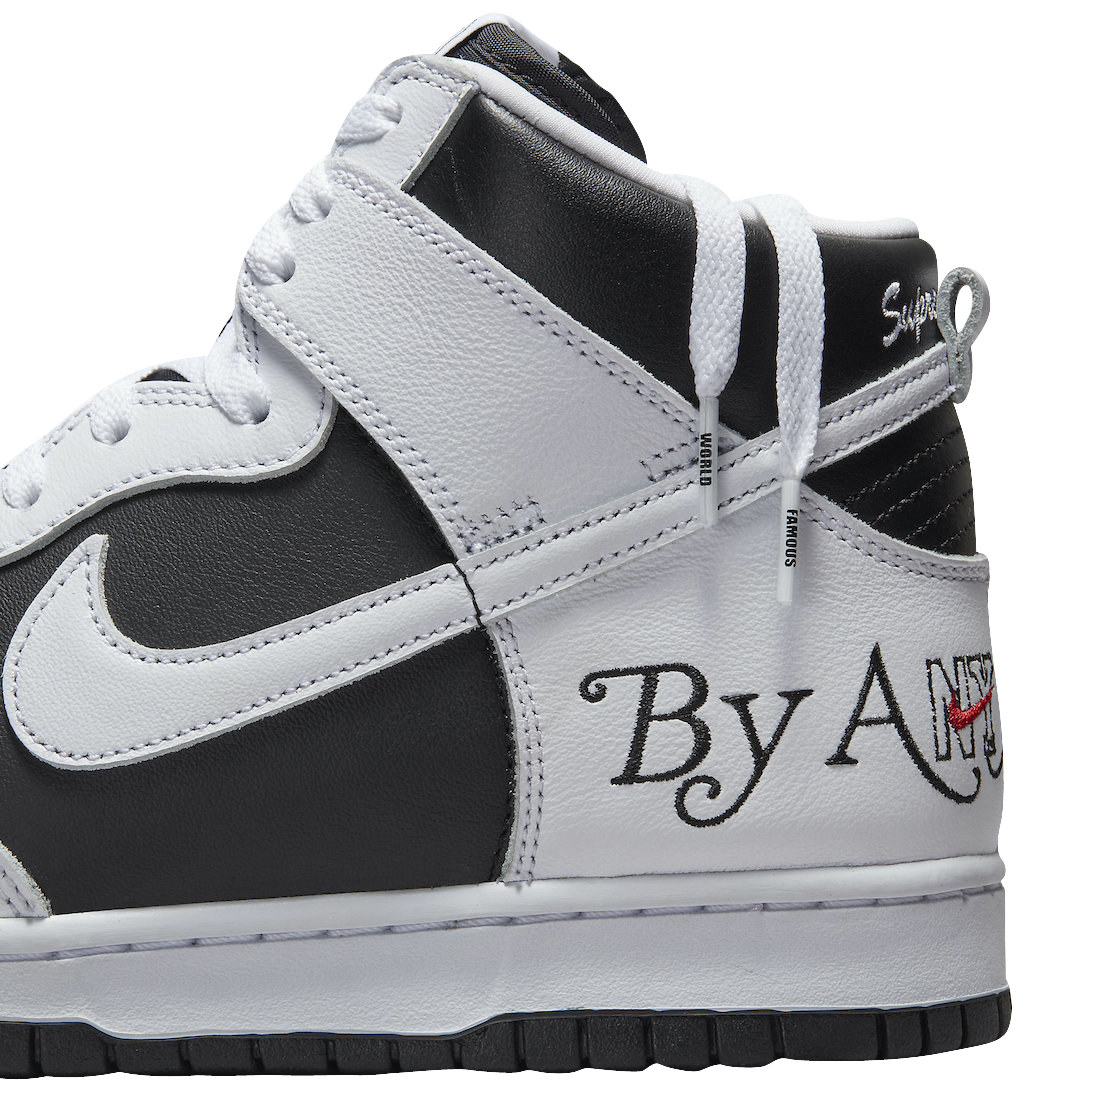 Supreme x Nike SB Dunk High By Any Means Black White